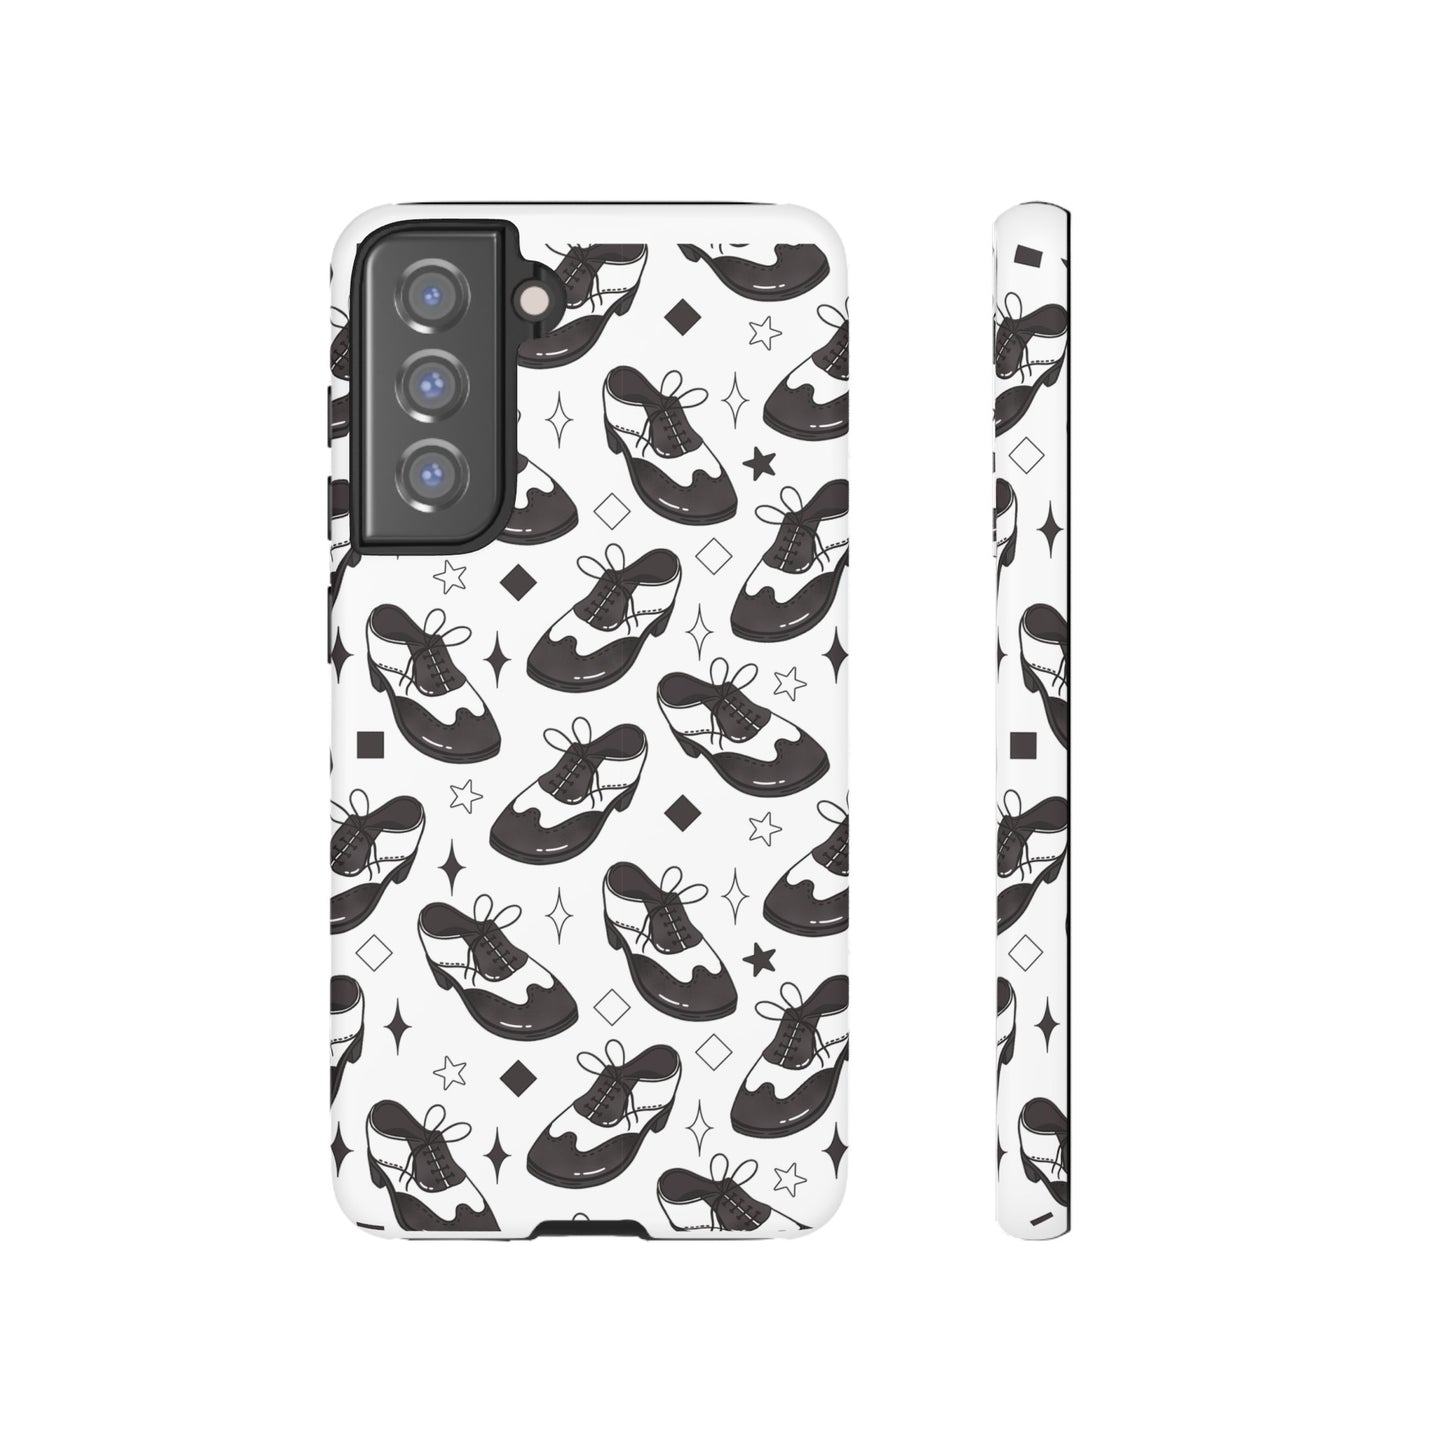 Spectator Style Tap Shoes Phone Case for iPhone, Samsung Galaxy, and Google Pixel